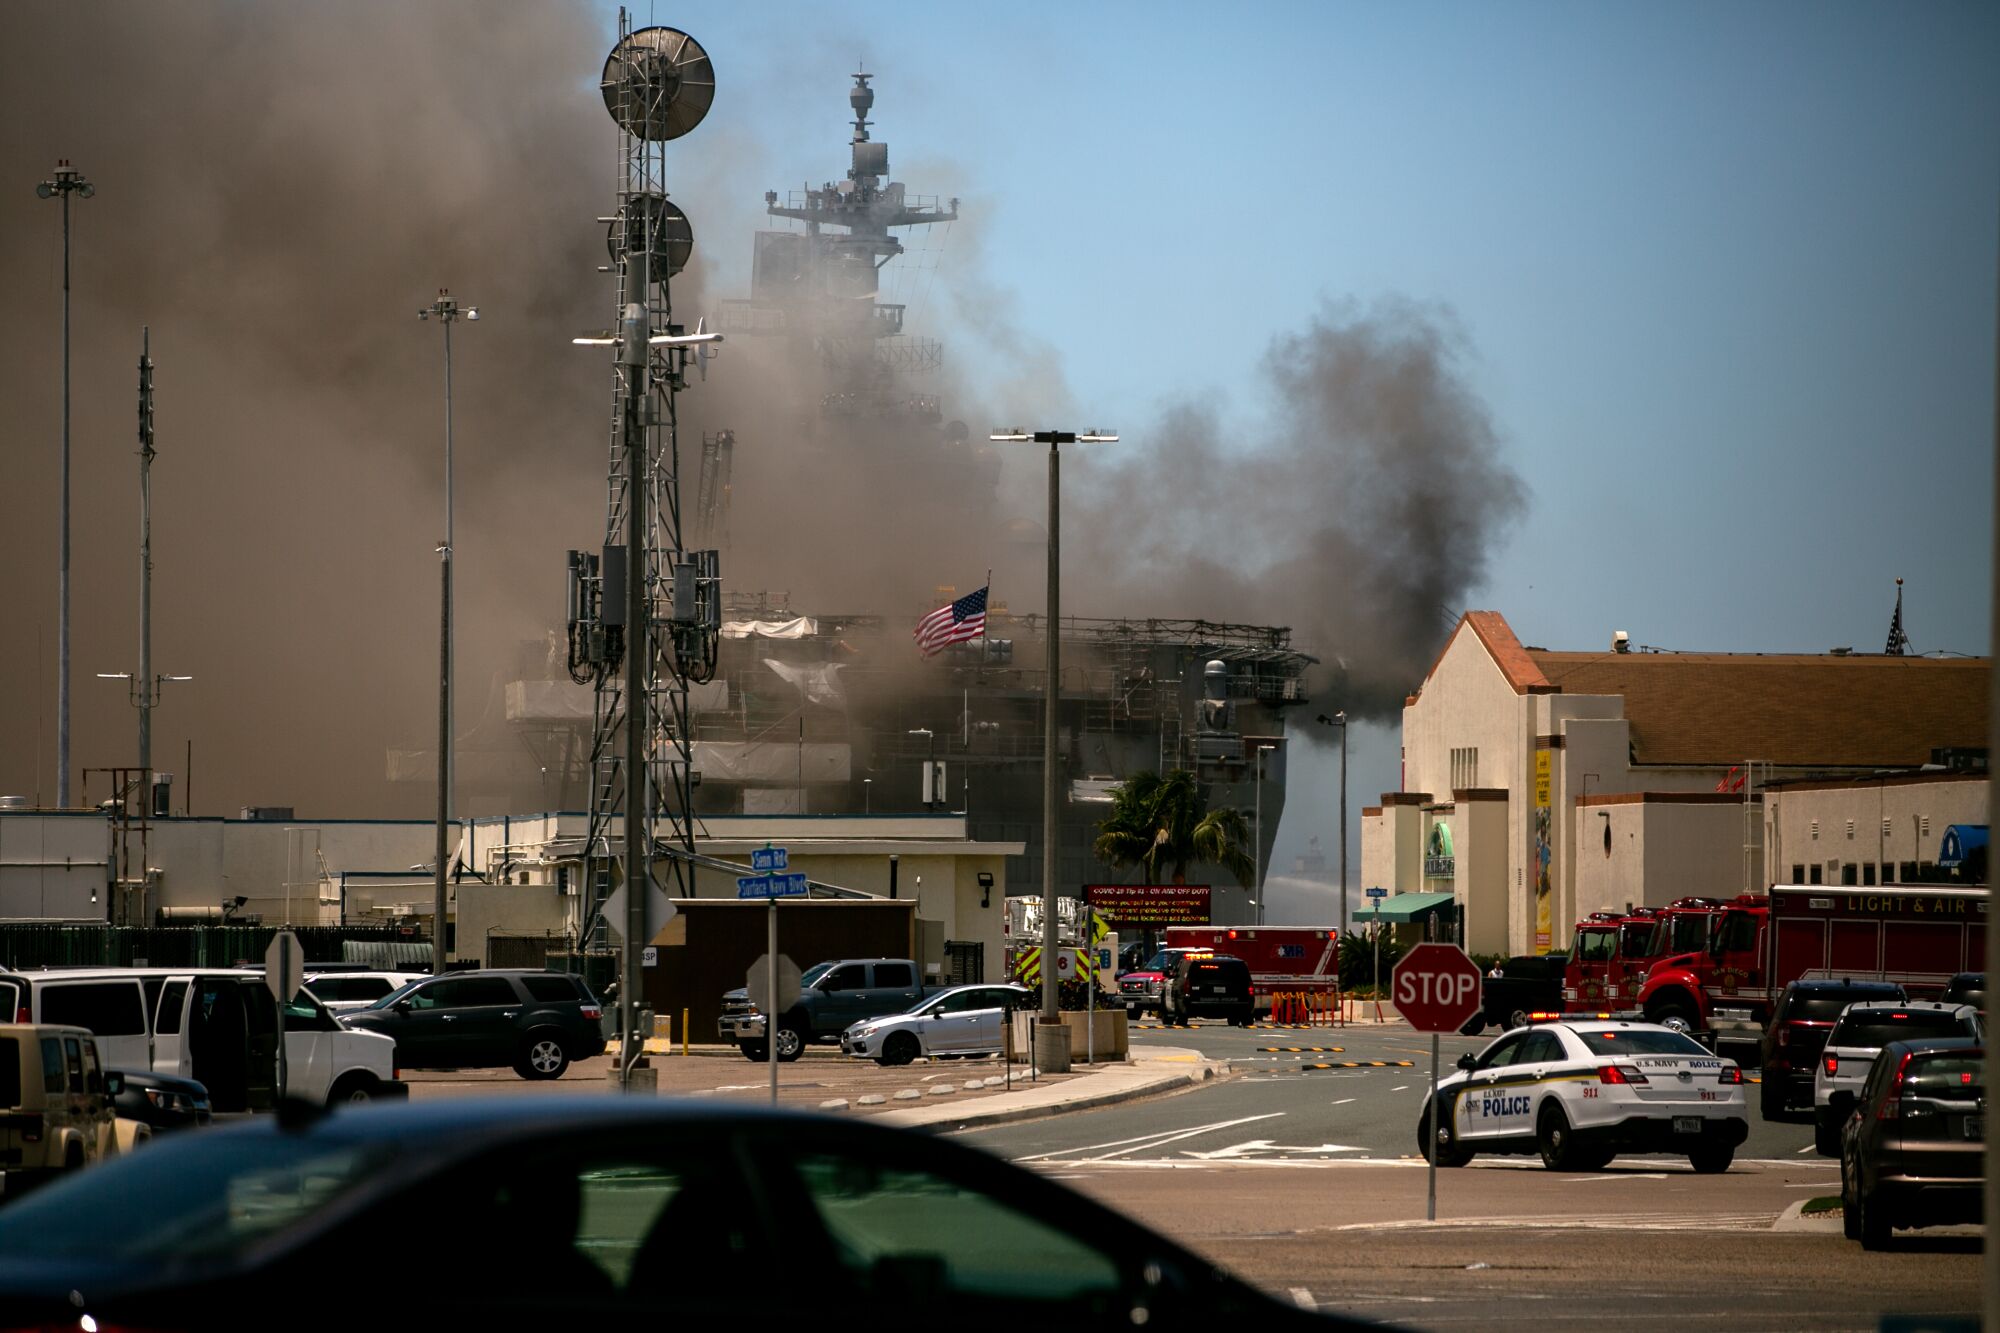 Emergency crews responded to the scene of a fire aboard the USS Bonhomme Richard.